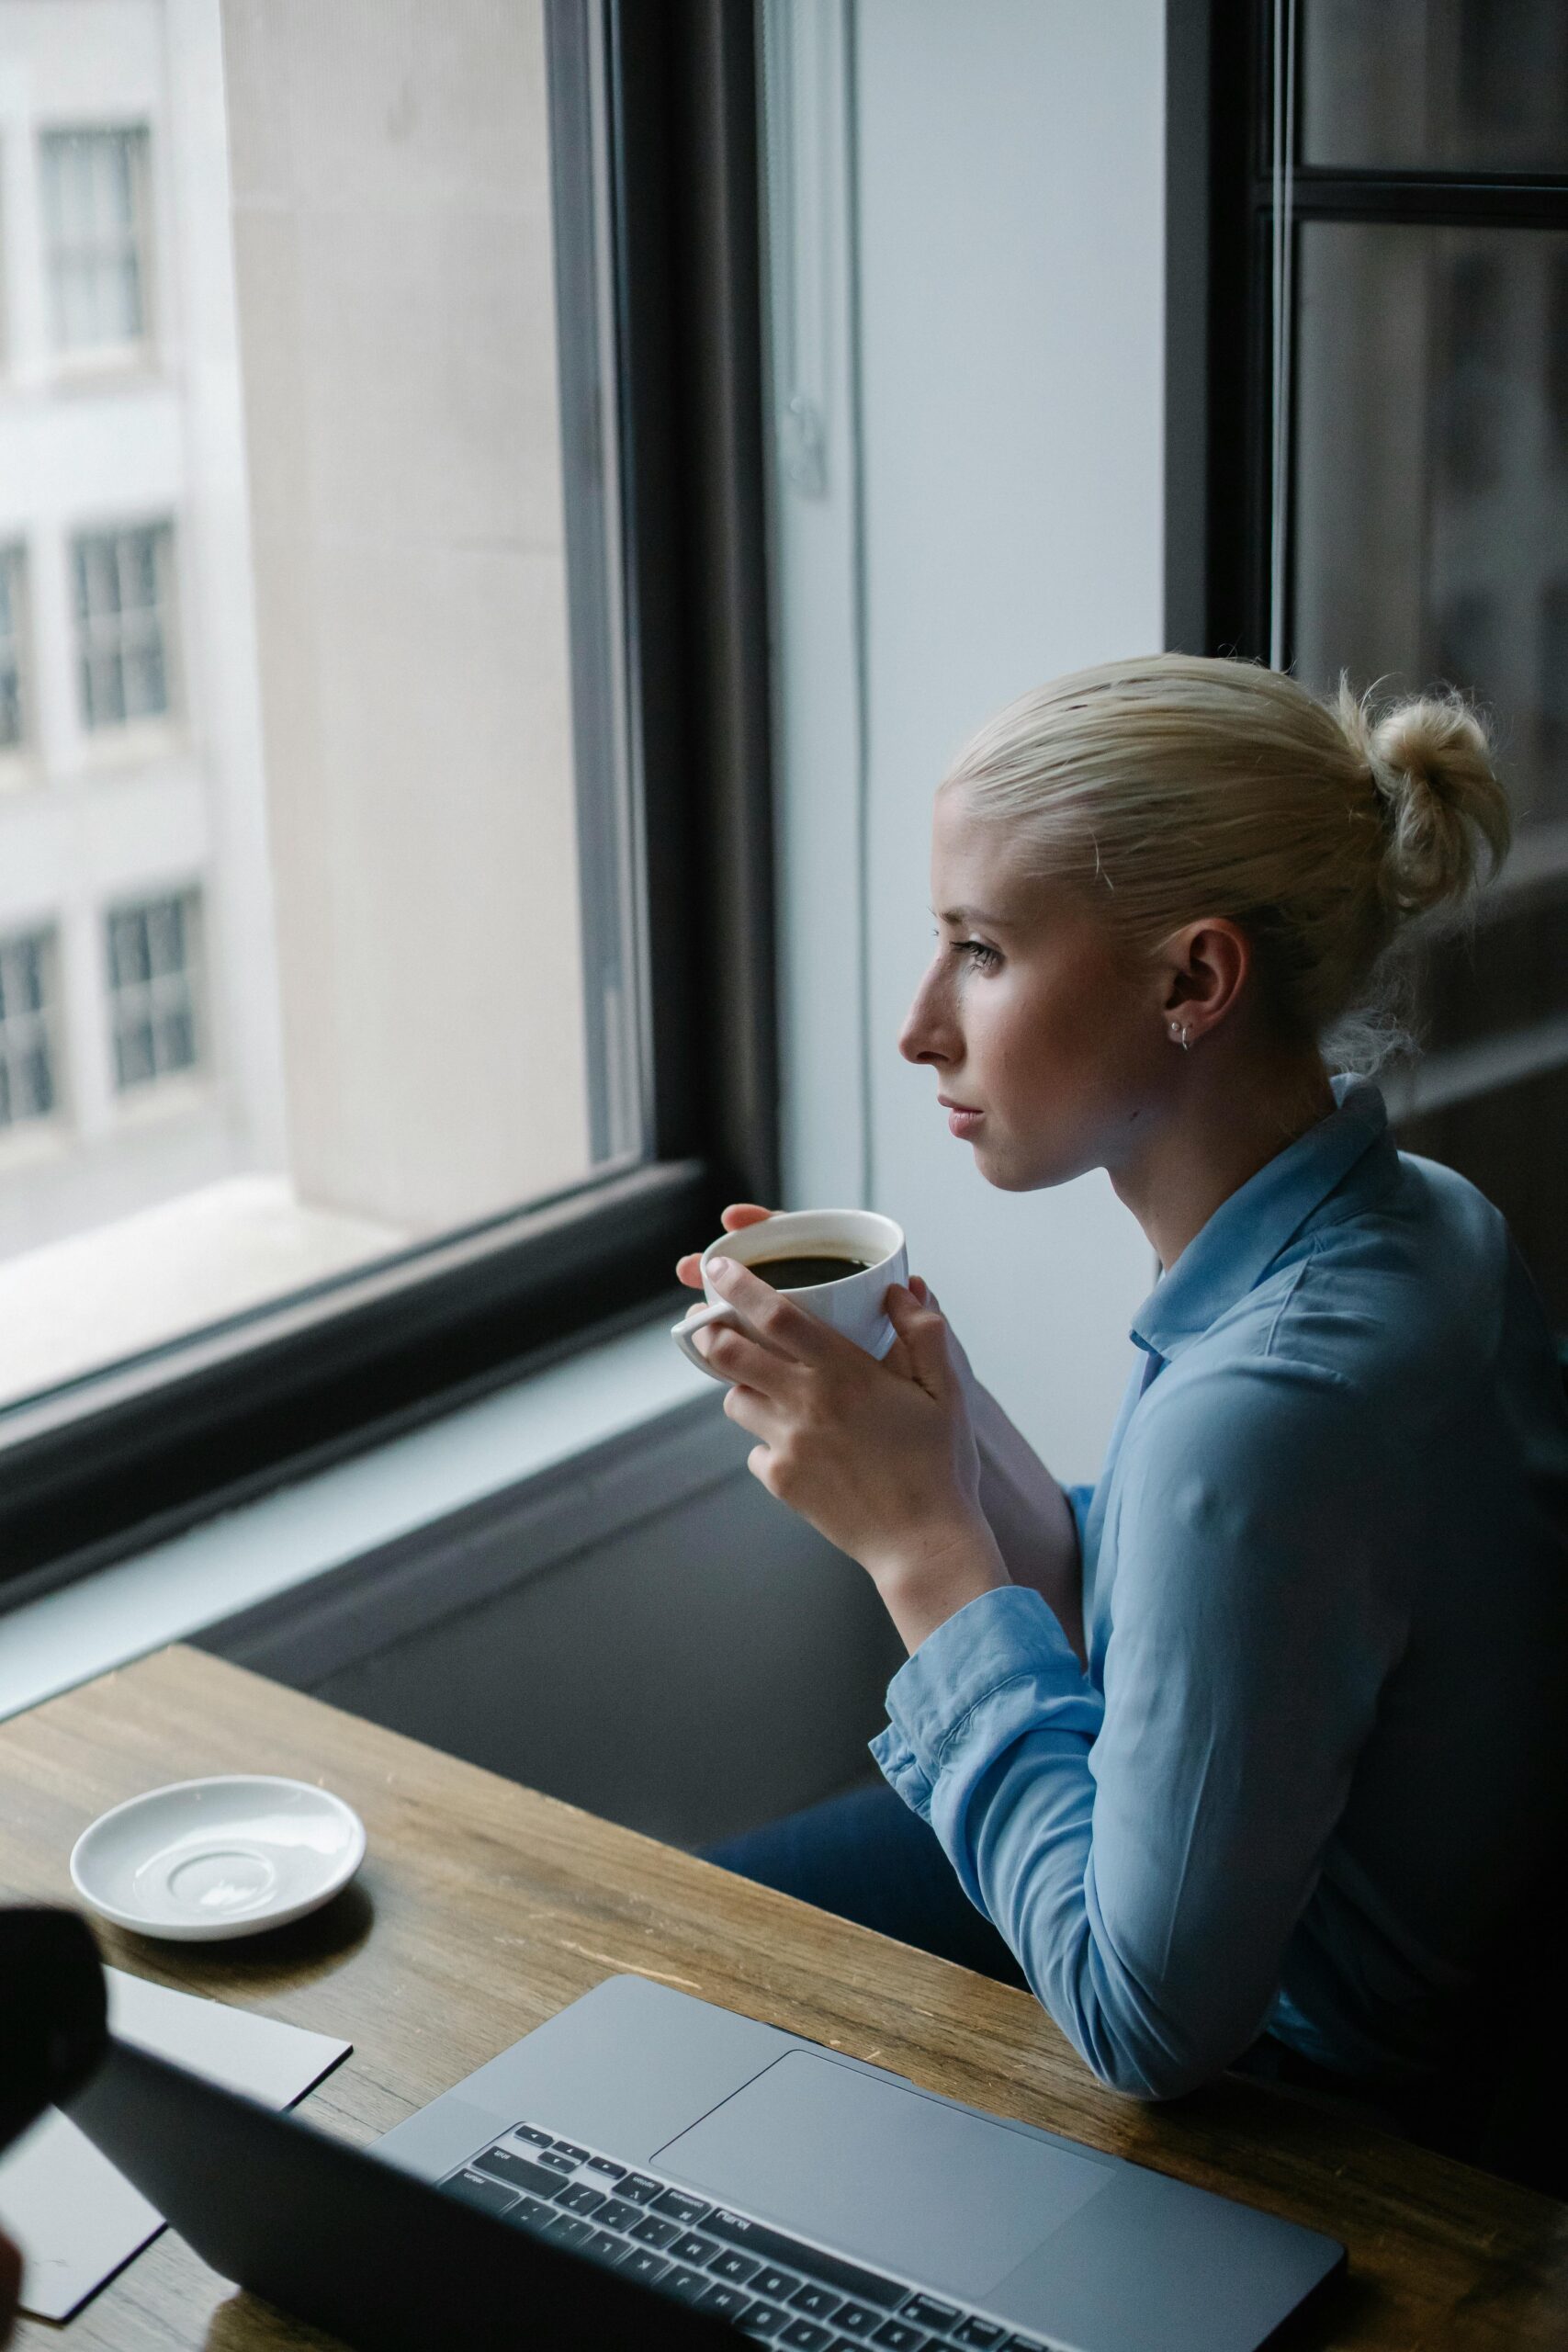 A woman drinking coffee, gazing out the window, wondering if Lexapro addiction is possible